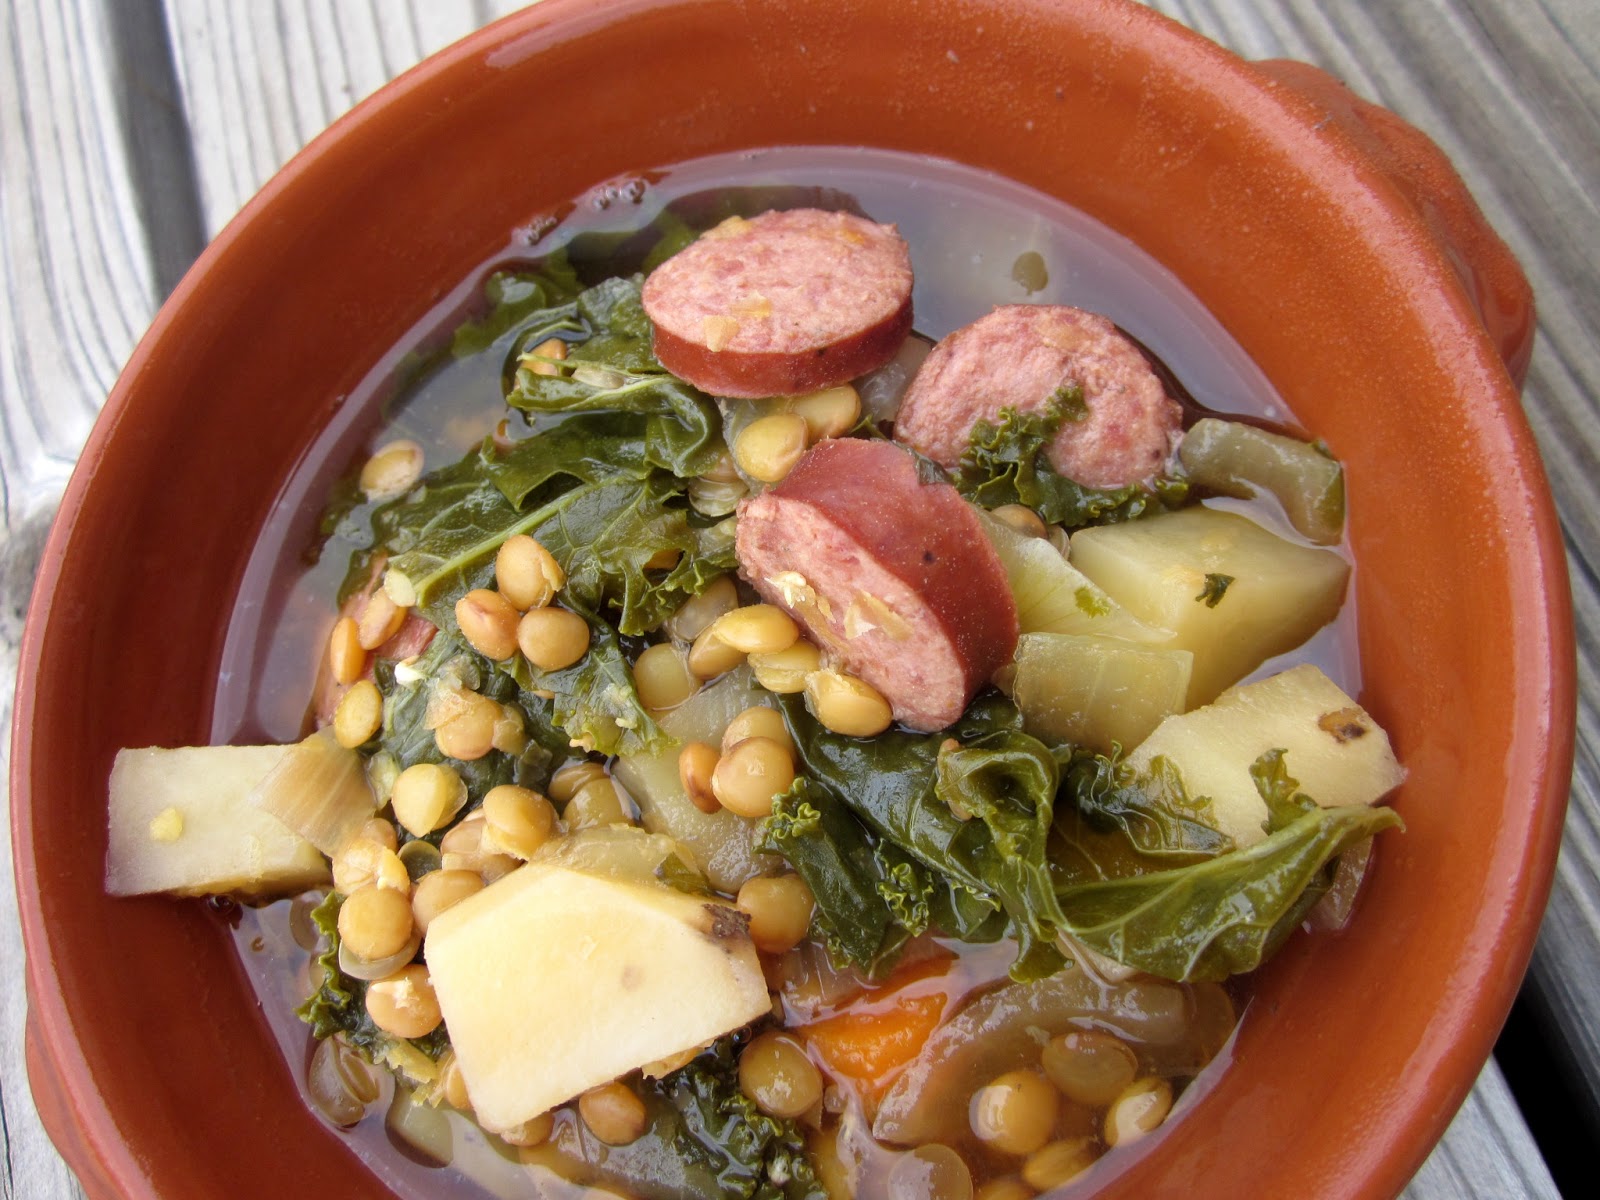 delightful country cookin': sausage lentil stew